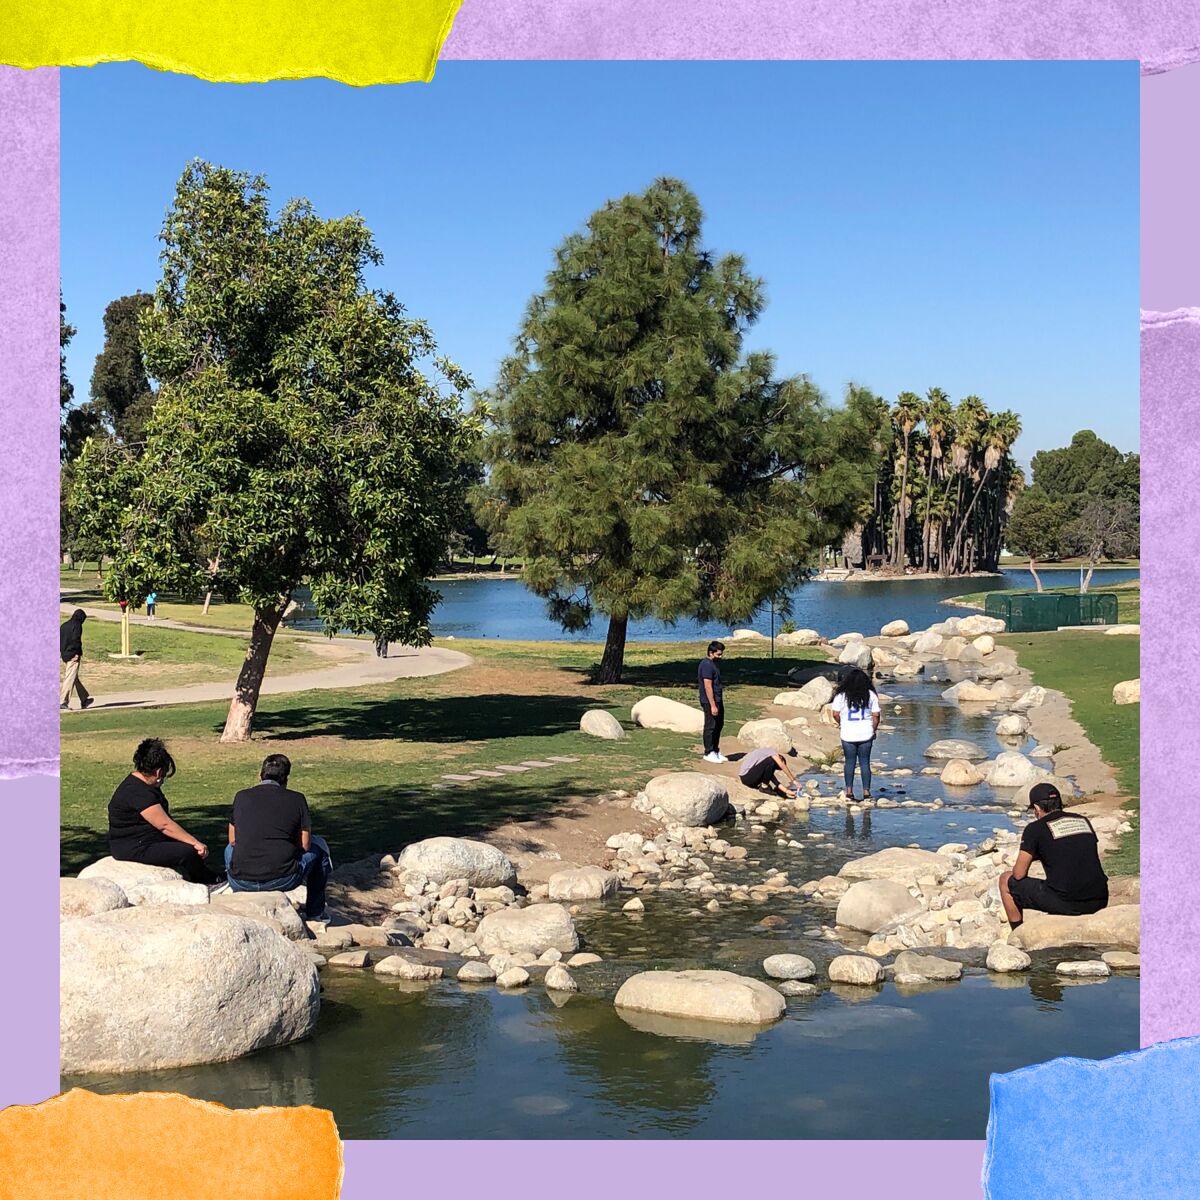 Park patrons sit on rocks and boulders in a set of shallows that connect the two lakes in Magic Johnson Park